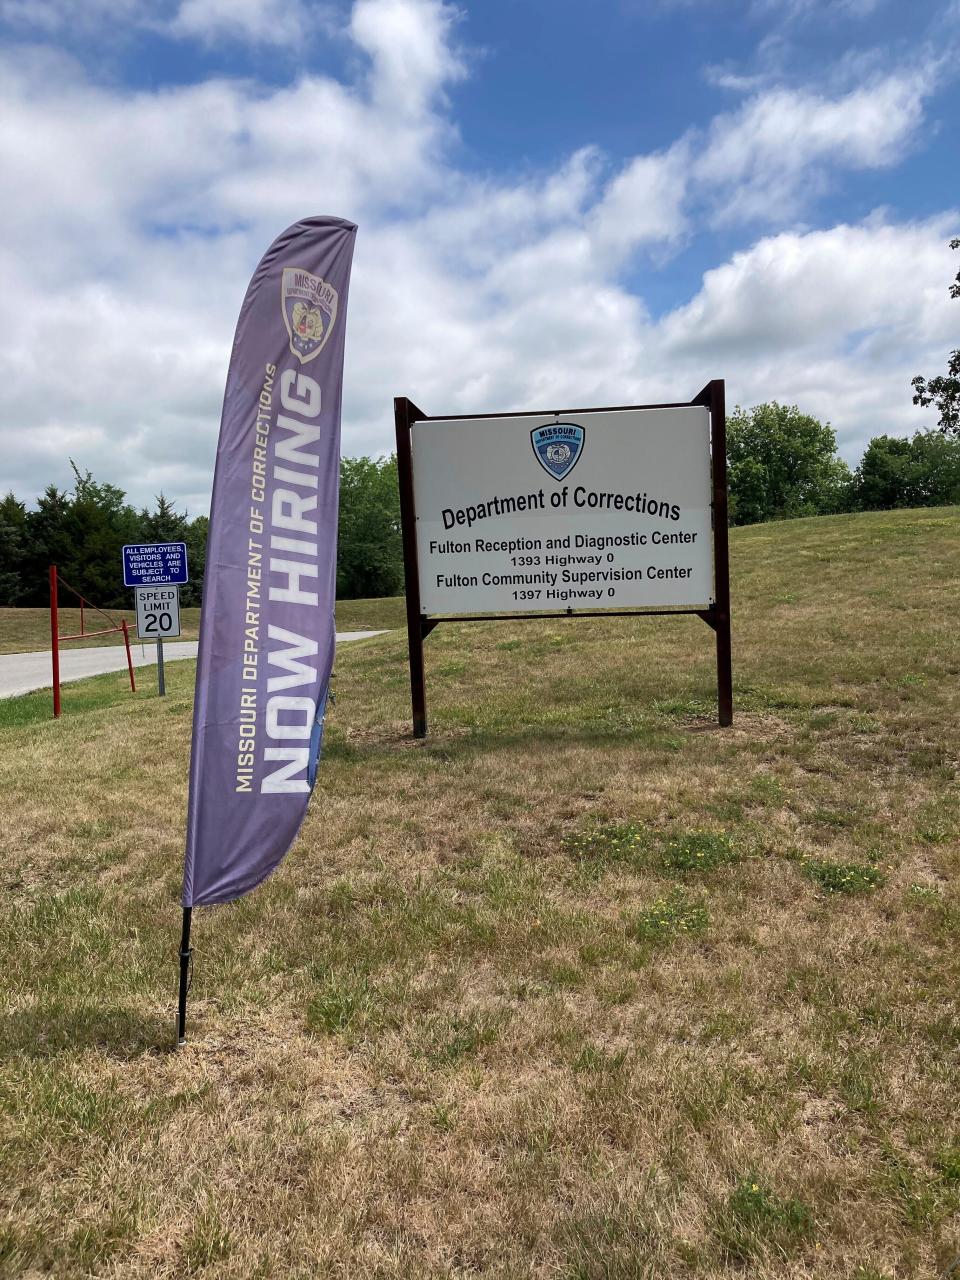 A "Now Hiring" sign is shown at the entrance to a Missouri Department of Corrections prison facility in July 2023 in Fulton, Missouri.